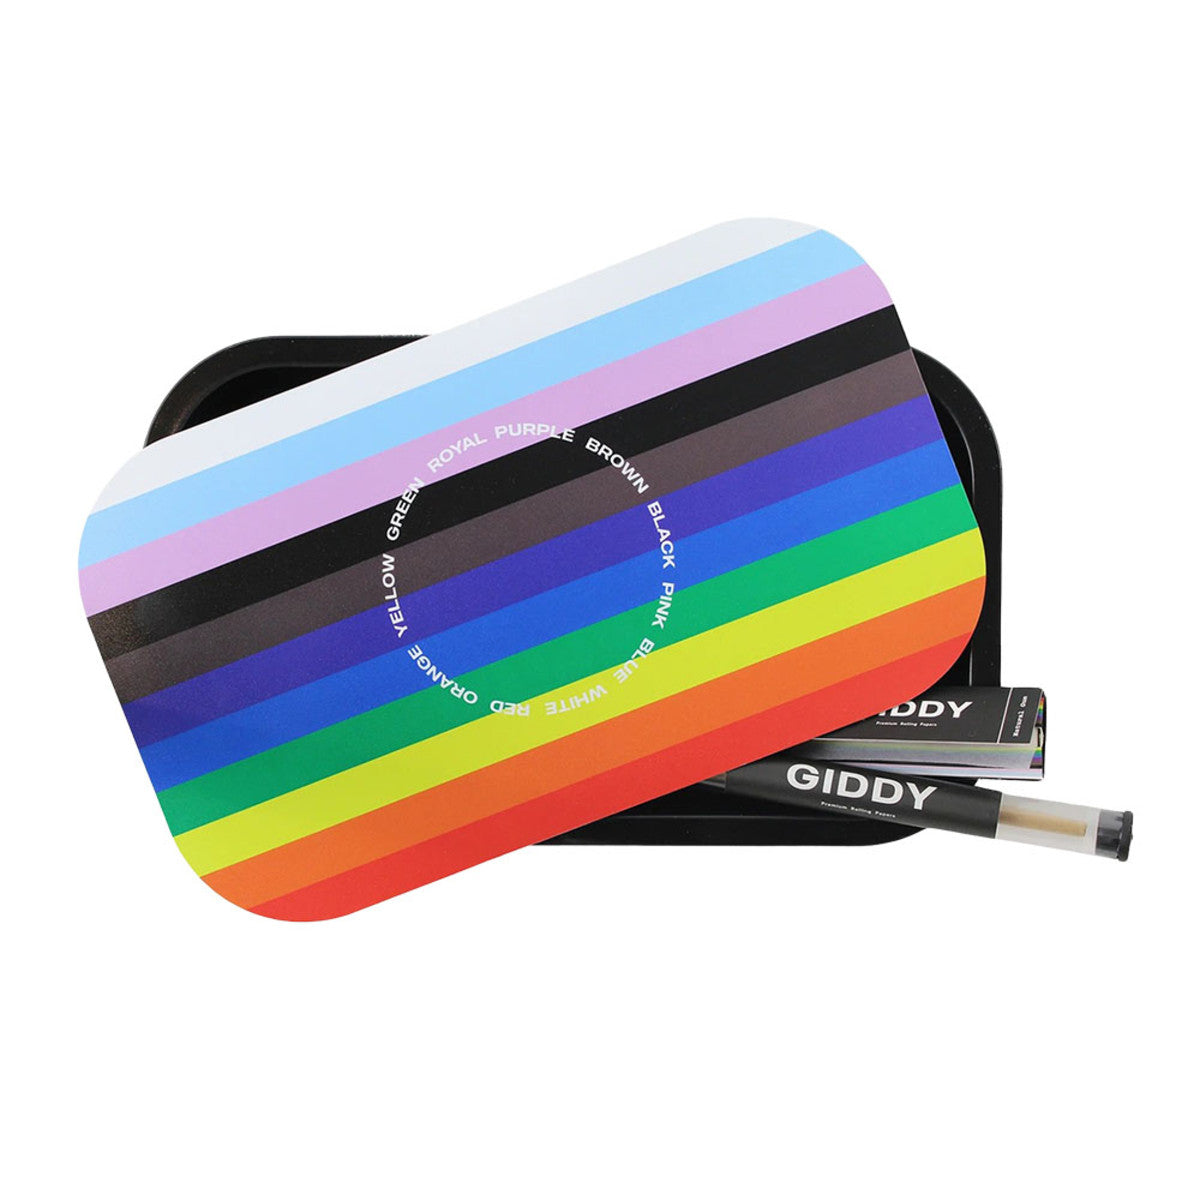 Ugly House Giddy Rolling Tray Bundle - Rainbow